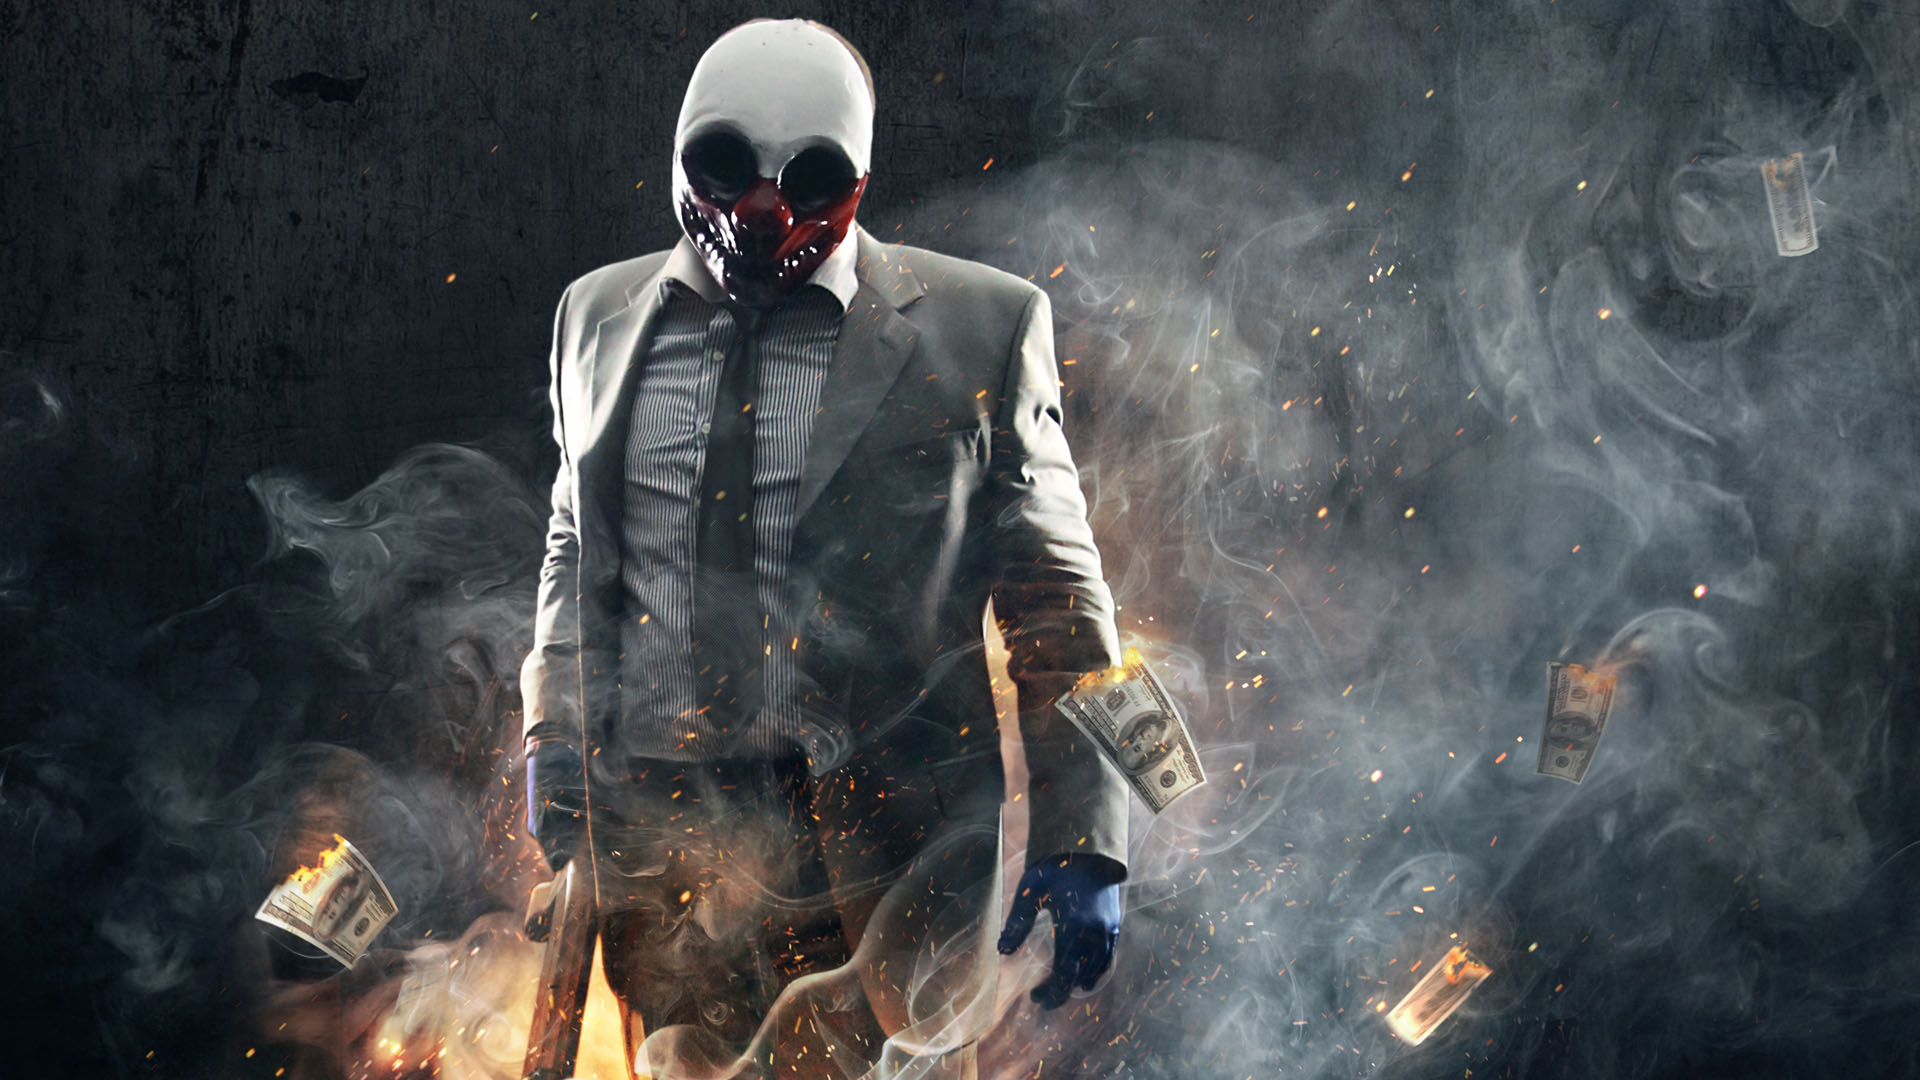 infamous payday 2 download free